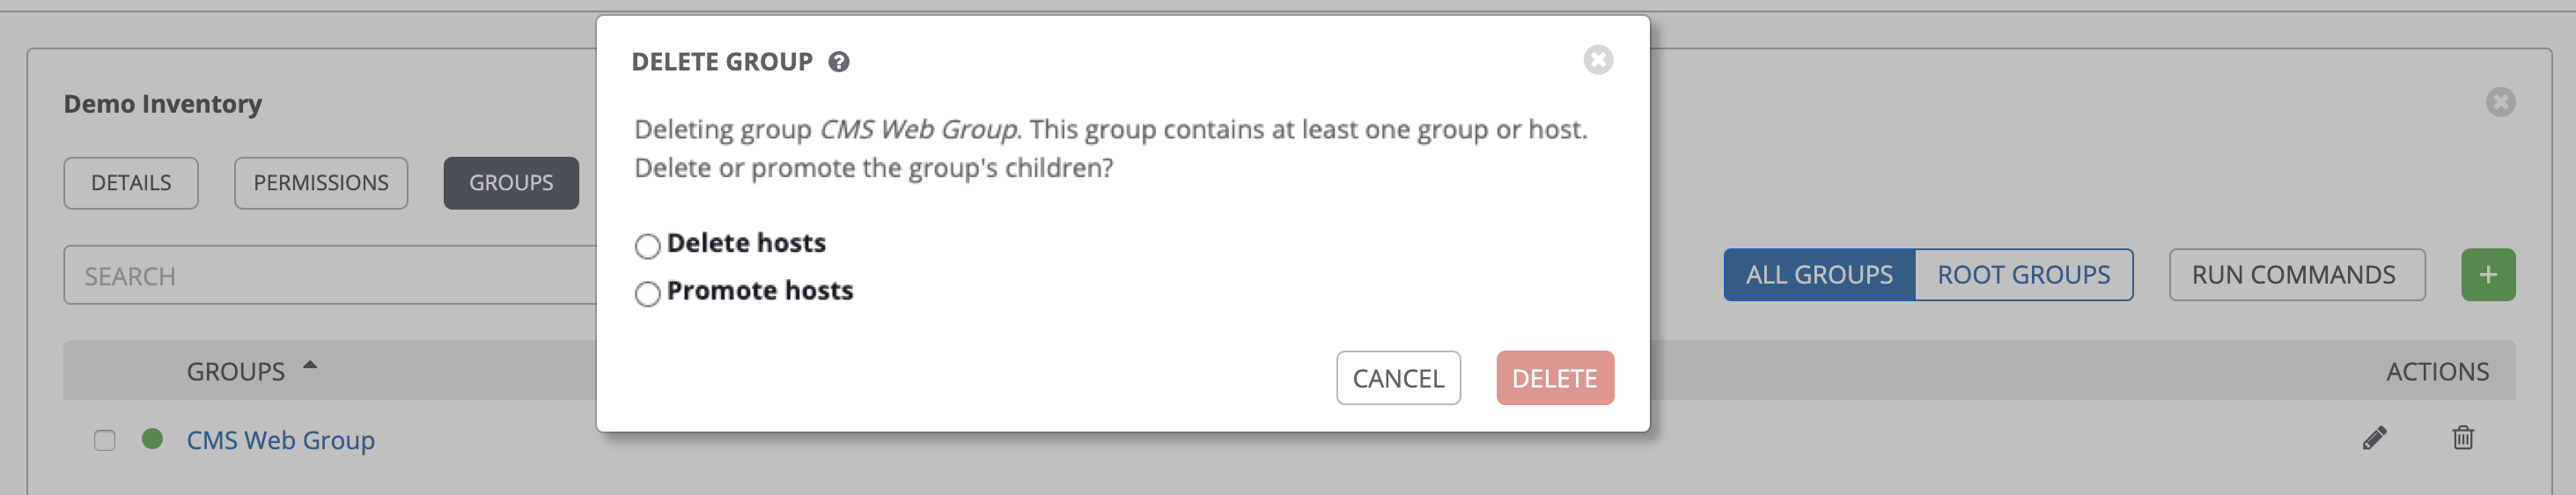 _images/inventories-groups-delete-root-with-child.png